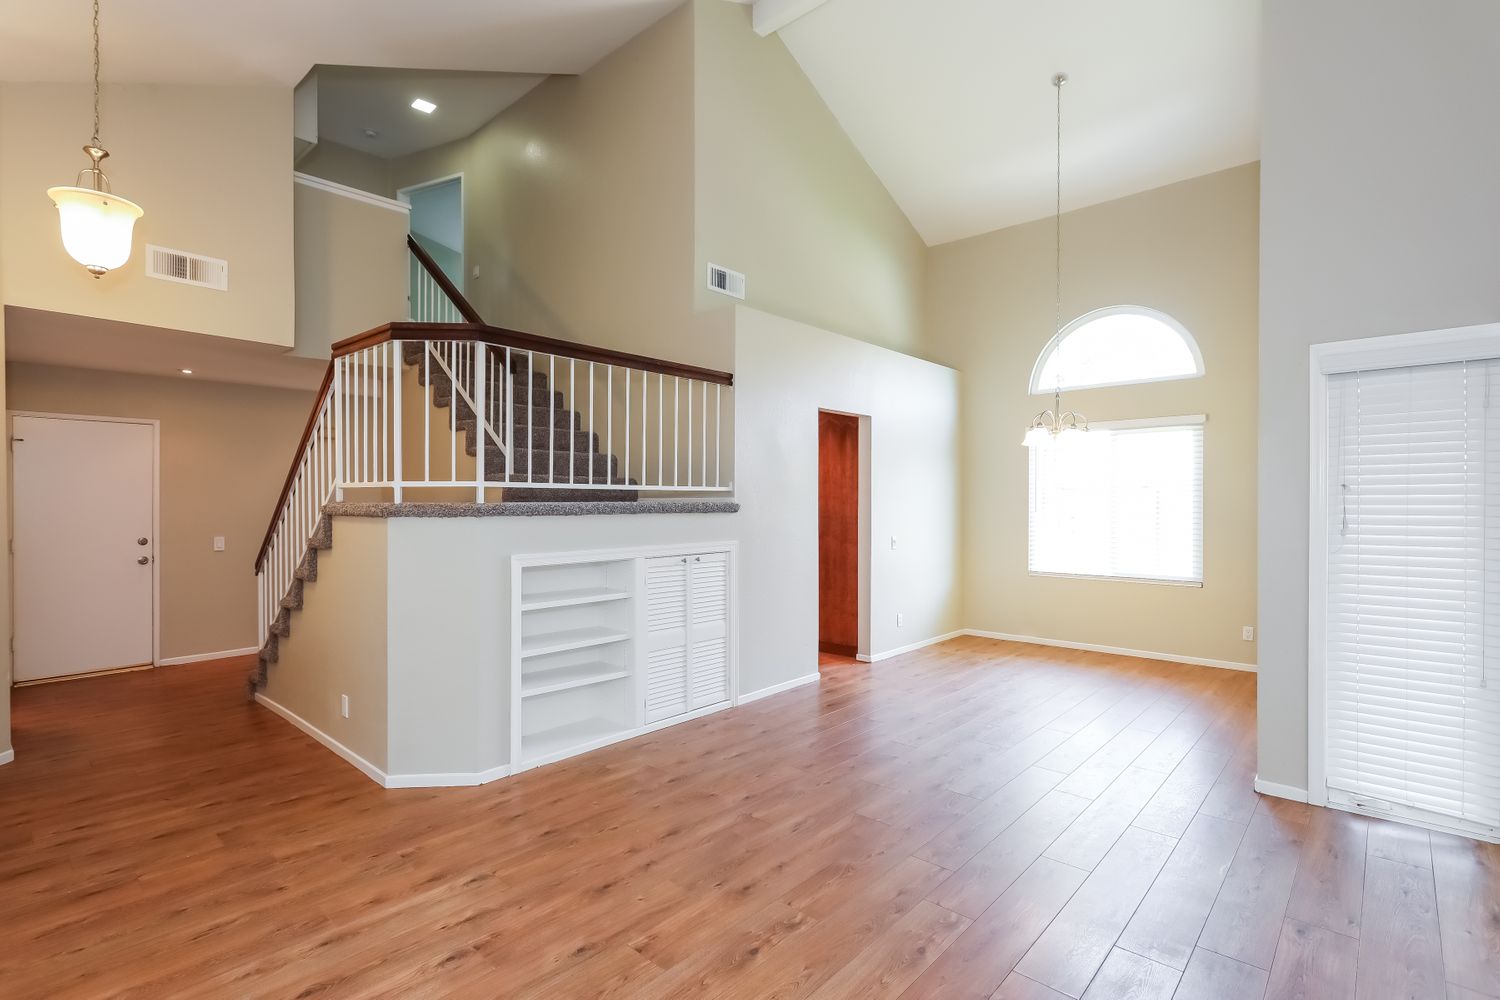 Entryway with updated floors and storage under the staircase at Invitation Homes Riverside.